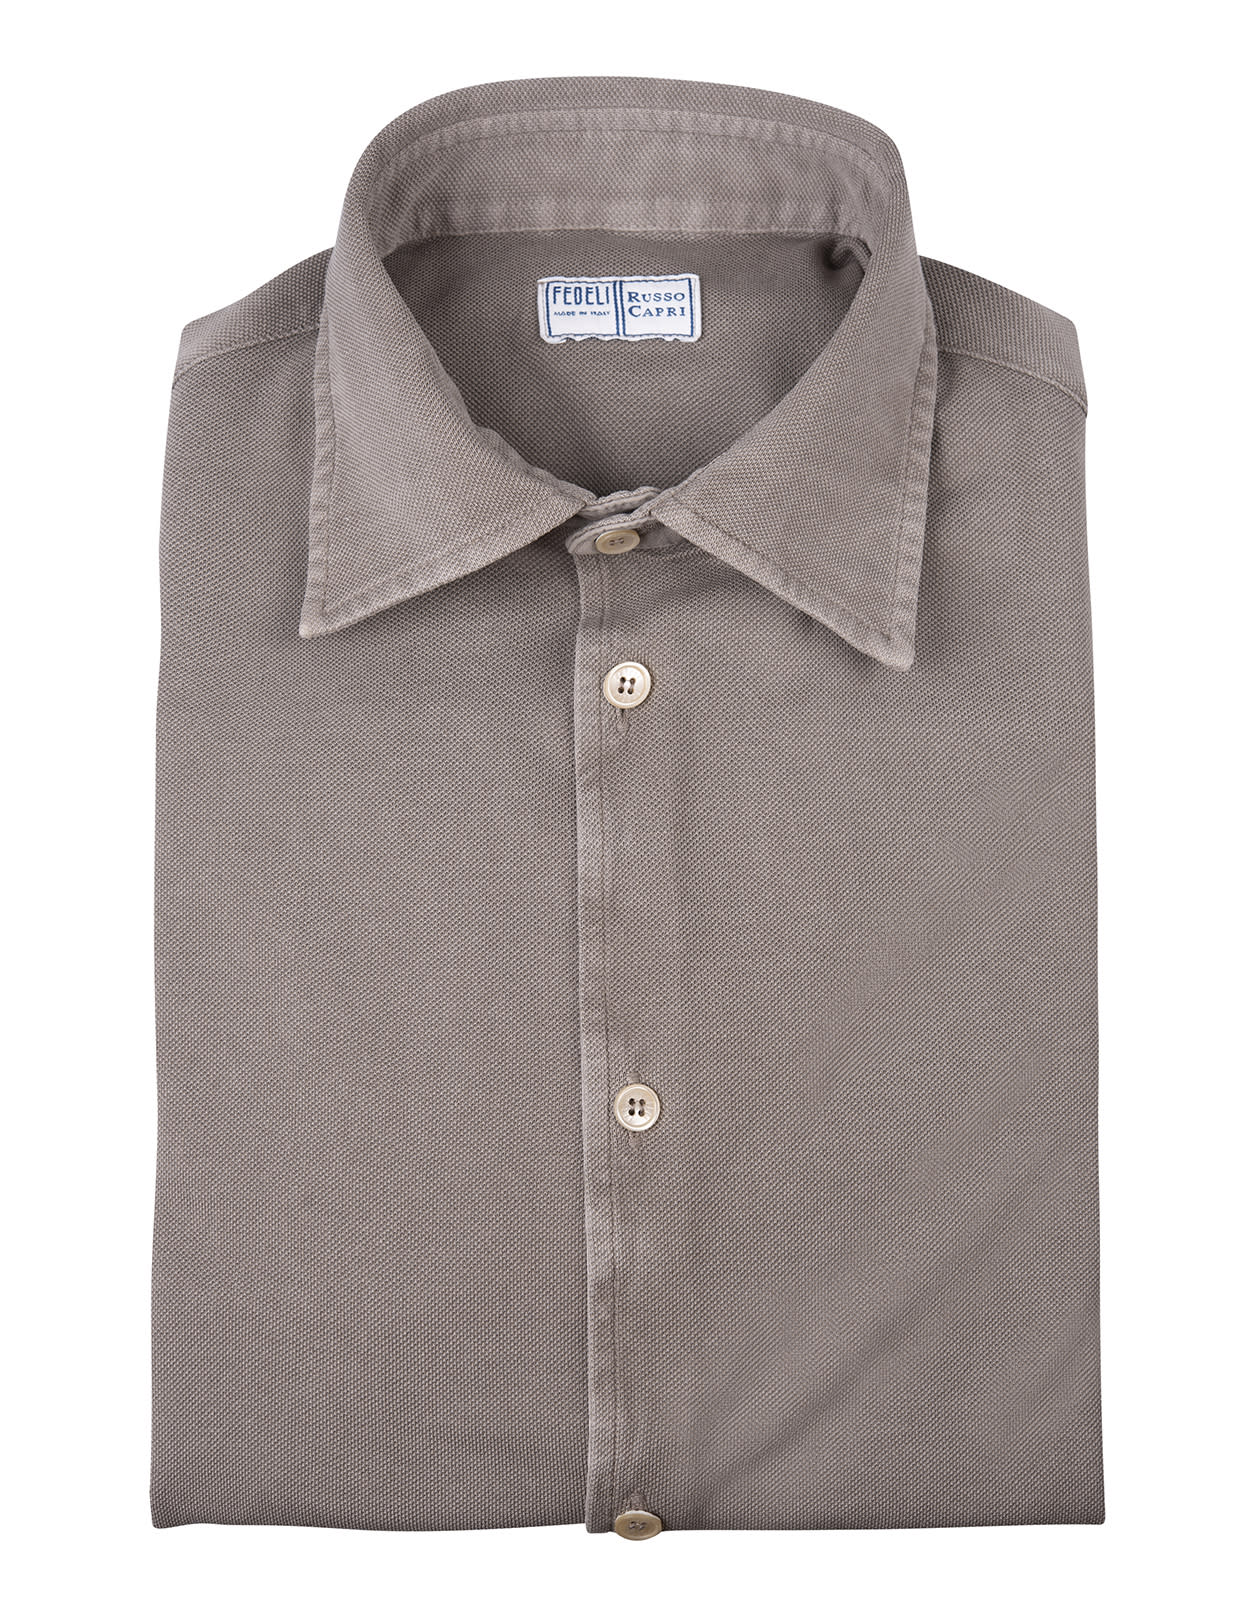 Fedeli Man Shirt In Taupe Cotton Pique